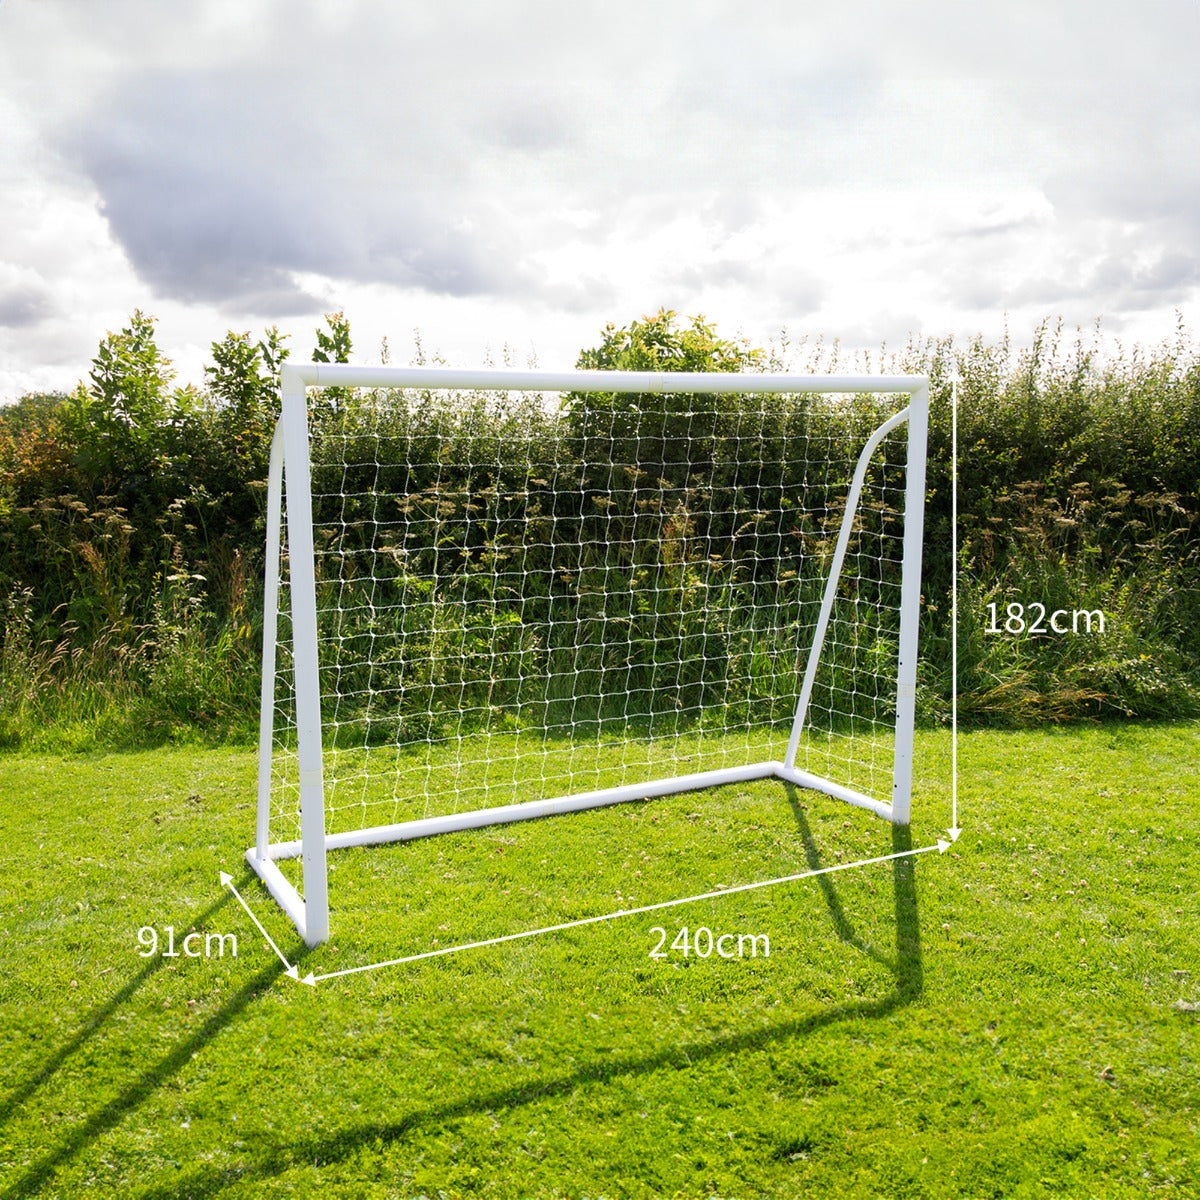 8 x 6ft Football Goal, Carry Case and Target Sheet